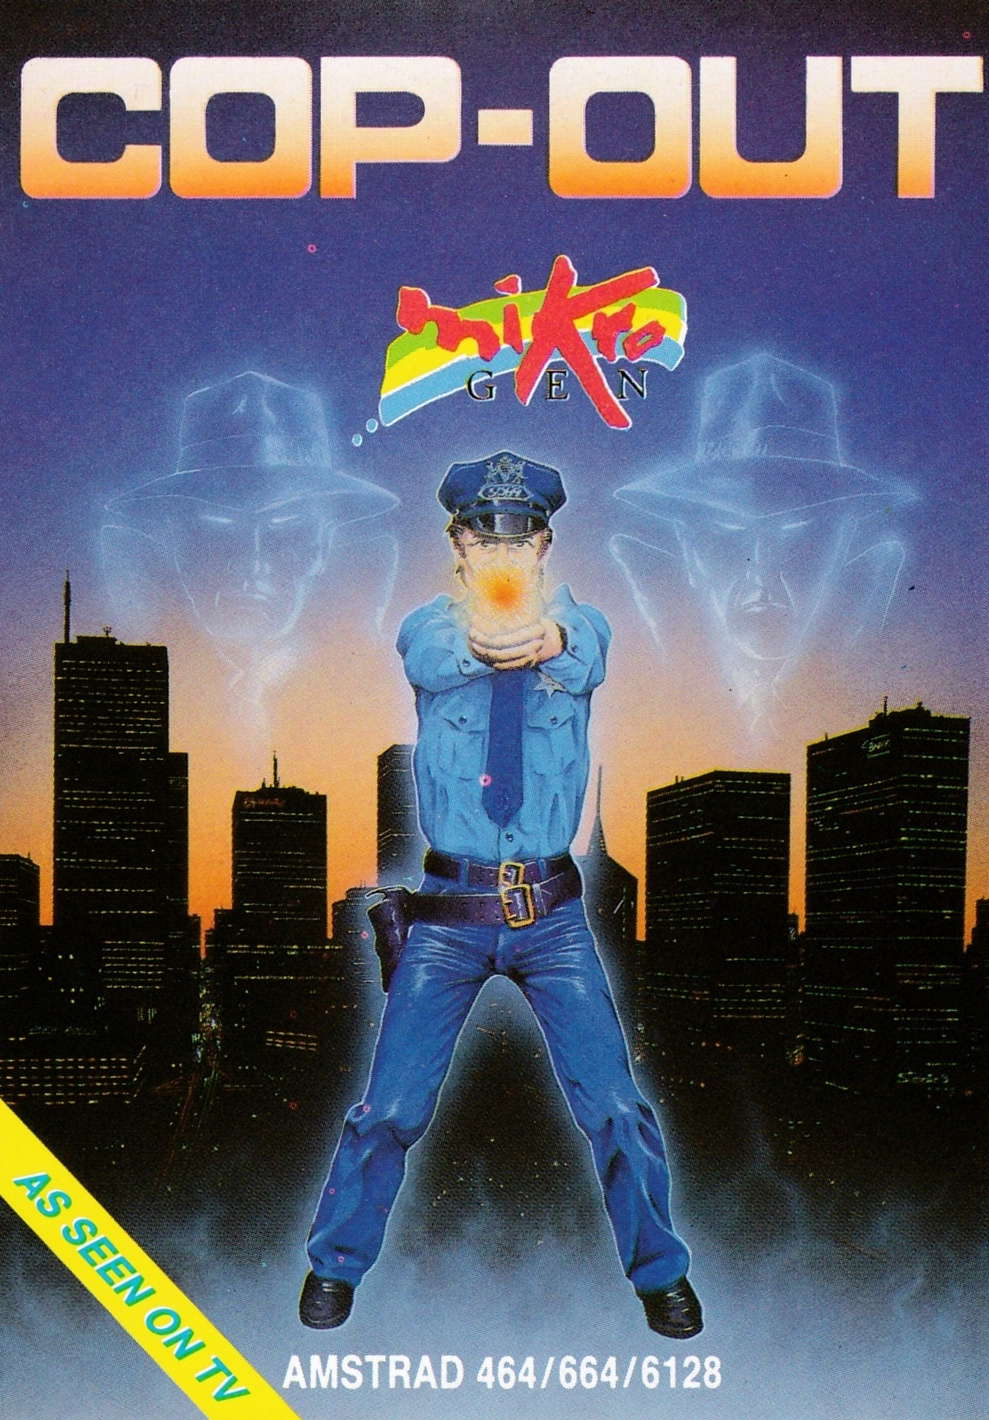 cover of the Amstrad CPC game Cop-Out  by GameBase CPC